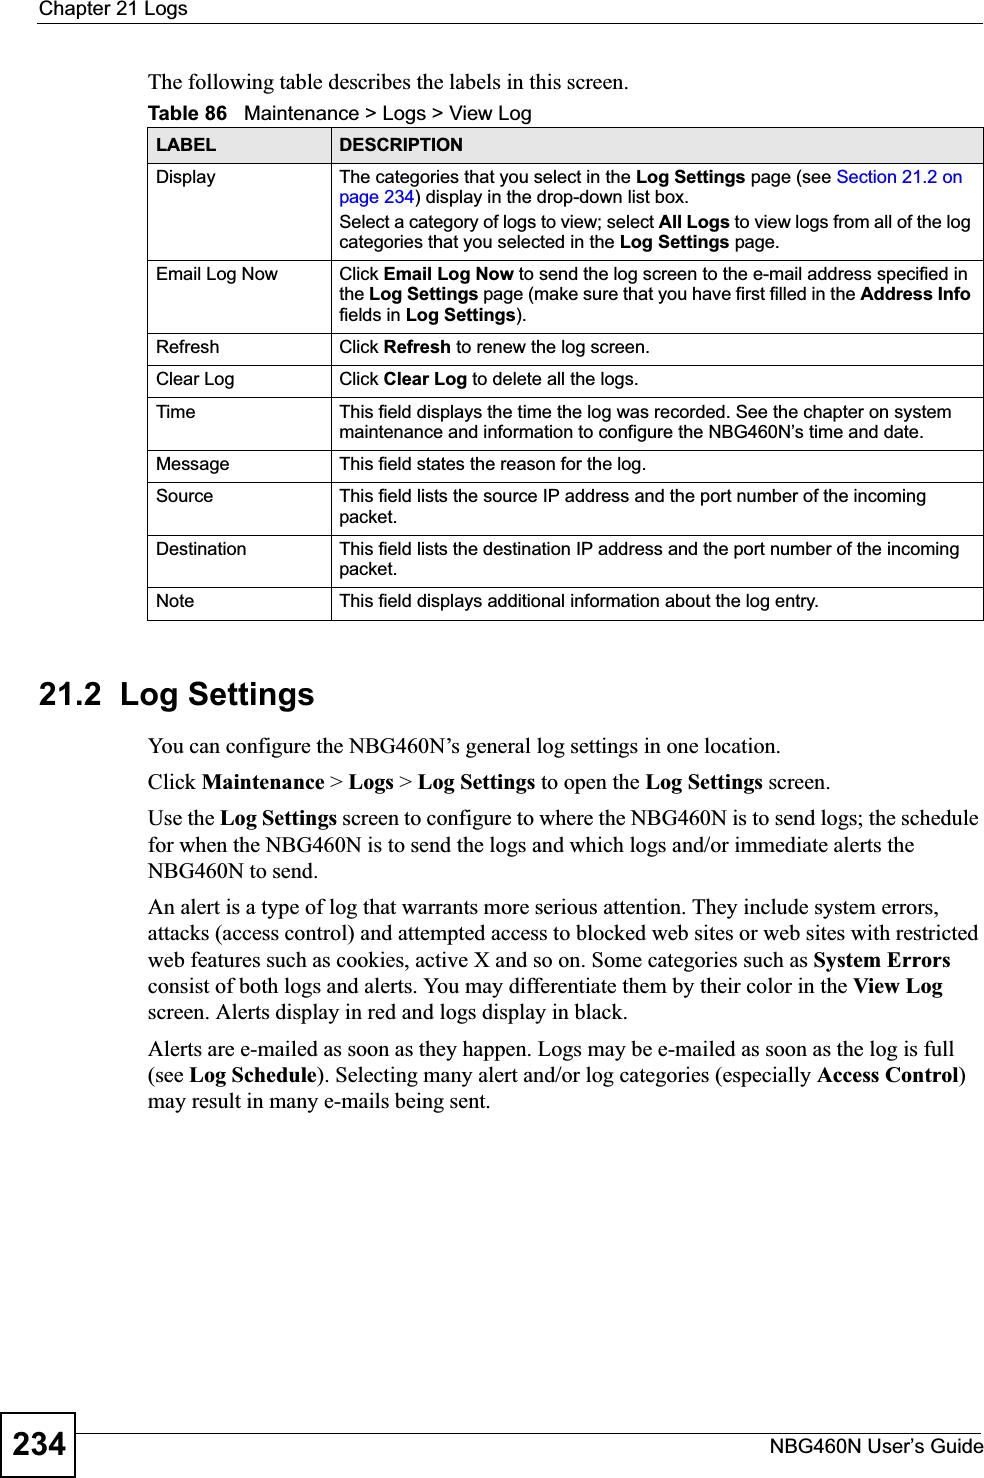 Chapter 21 LogsNBG460N User’s Guide234The following table describes the labels in this screen.21.2  Log SettingsYou can configure the NBG460N’s general log settings in one location.Click Maintenance &gt; Logs &gt; Log Settings to open the Log Settings screen.Use the Log Settings screen to configure to where the NBG460N is to send logs; the schedule for when the NBG460N is to send the logs and which logs and/or immediate alerts the NBG460N to send.An alert is a type of log that warrants more serious attention. They include system errors, attacks (access control) and attempted access to blocked web sites or web sites with restricted web features such as cookies, active X and so on. Some categories such as System Errorsconsist of both logs and alerts. You may differentiate them by their color in the View Log screen. Alerts display in red and logs display in black.Alerts are e-mailed as soon as they happen. Logs may be e-mailed as soon as the log is full (see Log Schedule). Selecting many alert and/or log categories (especially Access Control)may result in many e-mails being sent.Table 86   Maintenance &gt; Logs &gt; View LogLABEL DESCRIPTIONDisplay  The categories that you select in the Log Settings page (see Section 21.2 on page 234) display in the drop-down list box.Select a category of logs to view; select All Logs to view logs from all of the log categories that you selected in the Log Settings page. Email Log Now  Click Email Log Now to send the log screen to the e-mail address specified in the Log Settings page (make sure that you have first filled in the Address Infofields in Log Settings).Refresh Click Refresh to renew the log screen. Clear Log  Click Clear Log to delete all the logs. Time  This field displays the time the log was recorded. See the chapter on system maintenance and information to configure the NBG460N’s time and date.Message This field states the reason for the log.Source This field lists the source IP address and the port number of the incoming packet.Destination  This field lists the destination IP address and the port number of the incoming packet.Note This field displays additional information about the log entry. 